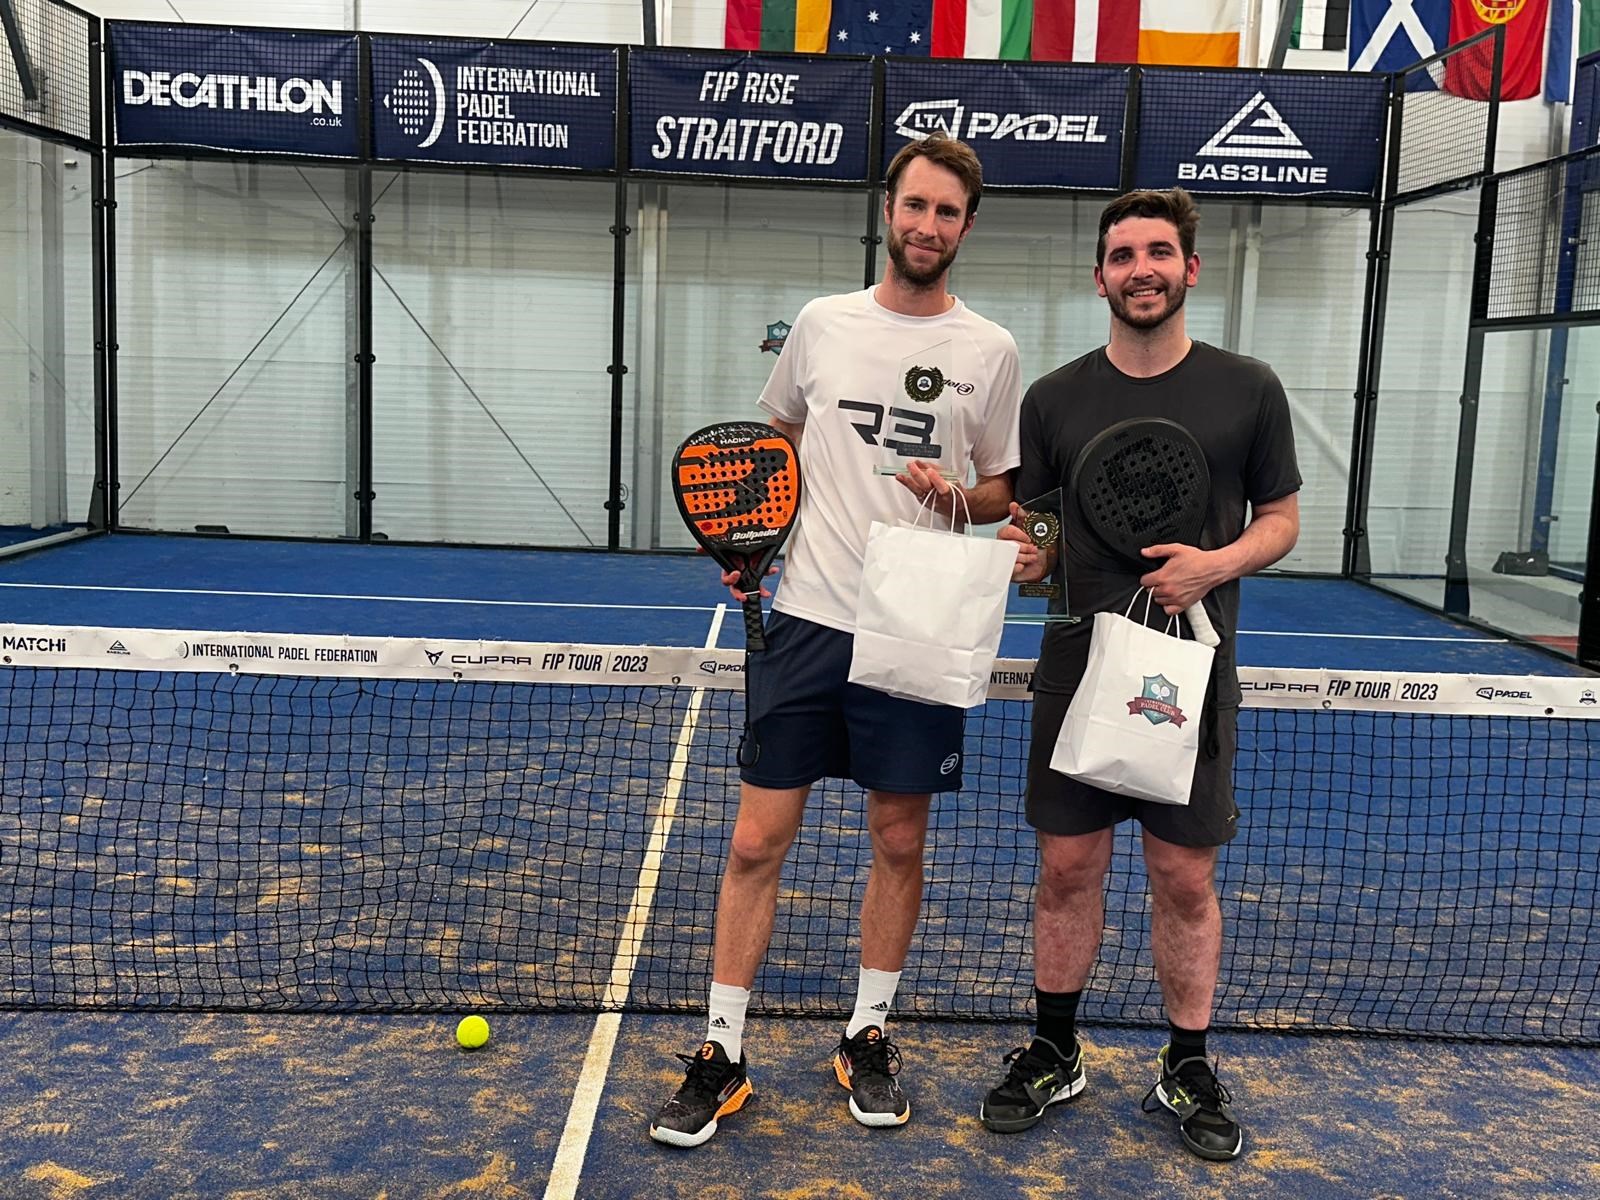 Chris Salisbury and Alfonso Patacho holding their trophies and padel bats on court at the FIP Rise event in Stratford